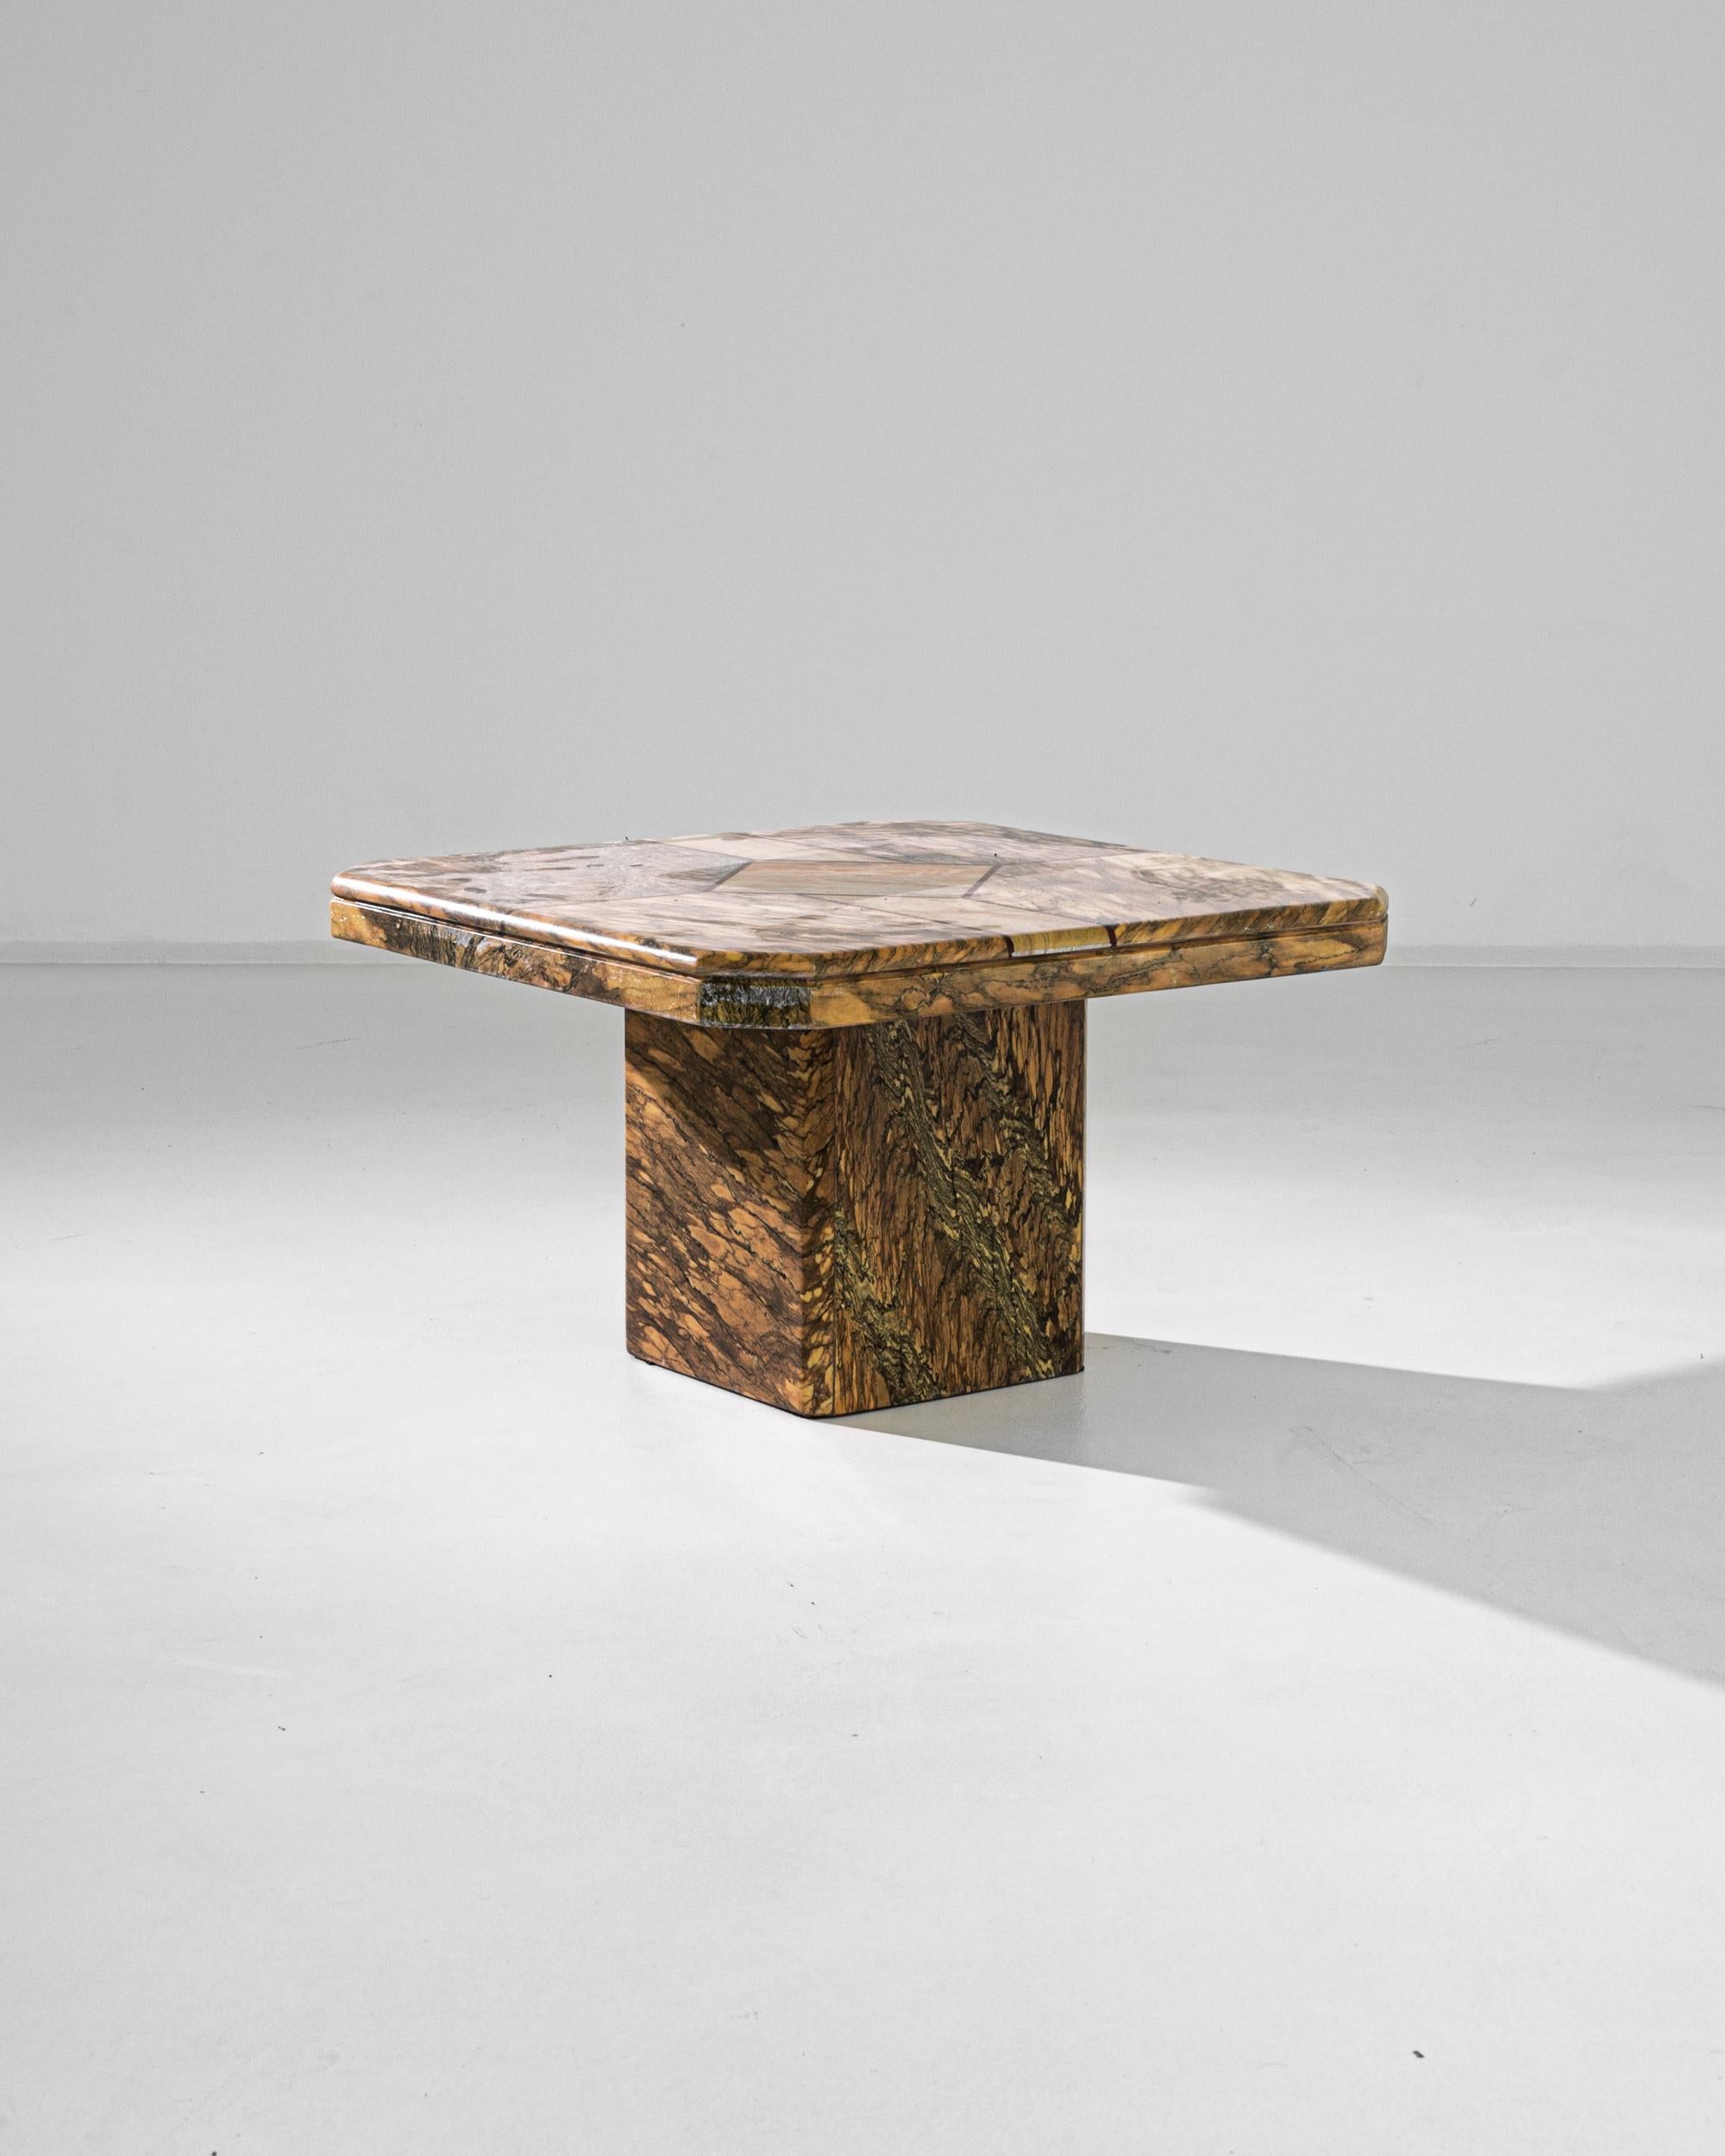 A marble coffee table from France, circa 1970. Conjoining geometric slabs of marble shape this piece into an ornate and sharp work of craftsmanship. Its lively web of marble veins running through the stone create a kinetic flow of detail around the